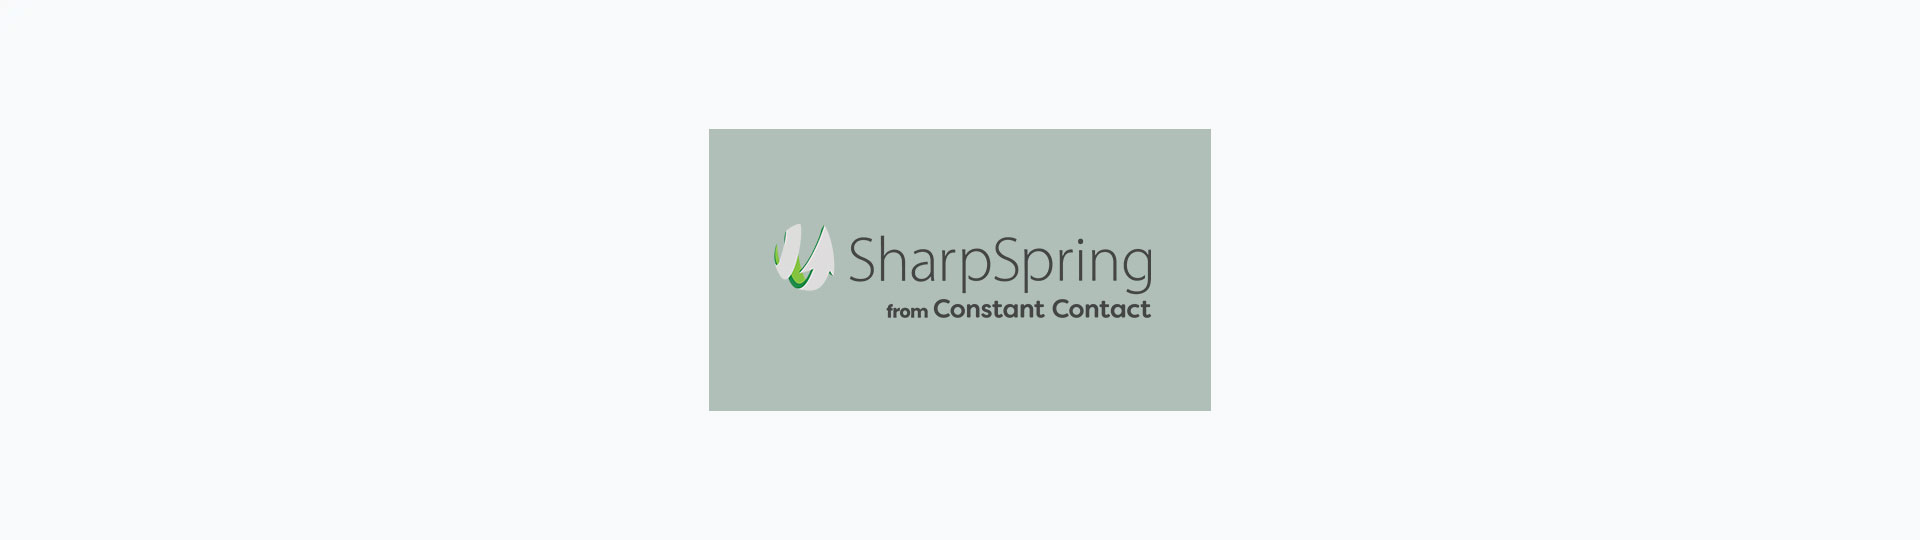 SharpSpring from Constant Contact